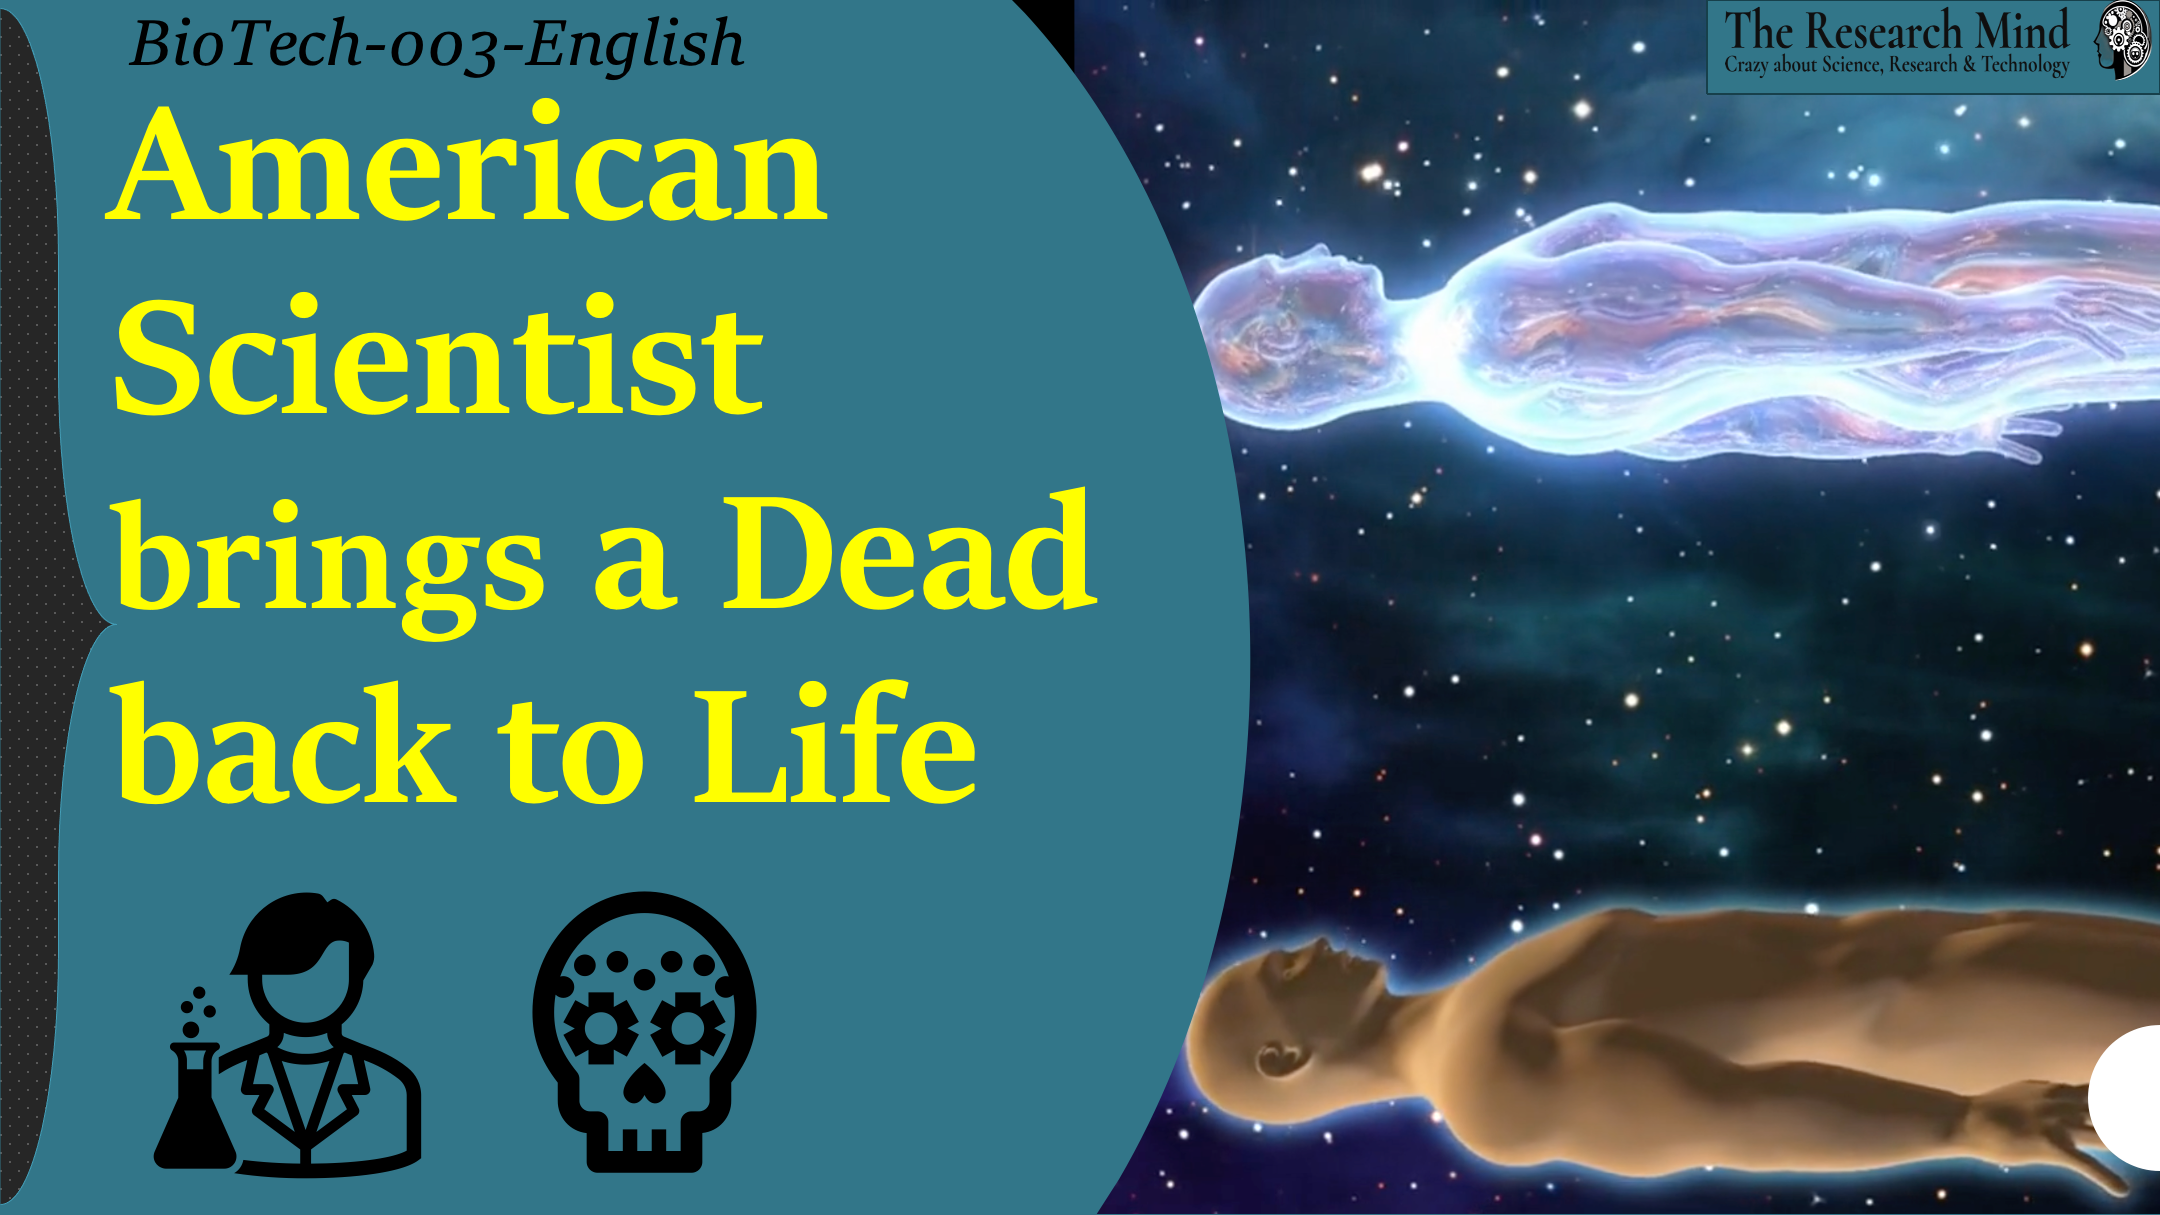 Rise from Dead: Scientist bring Dead back to Life